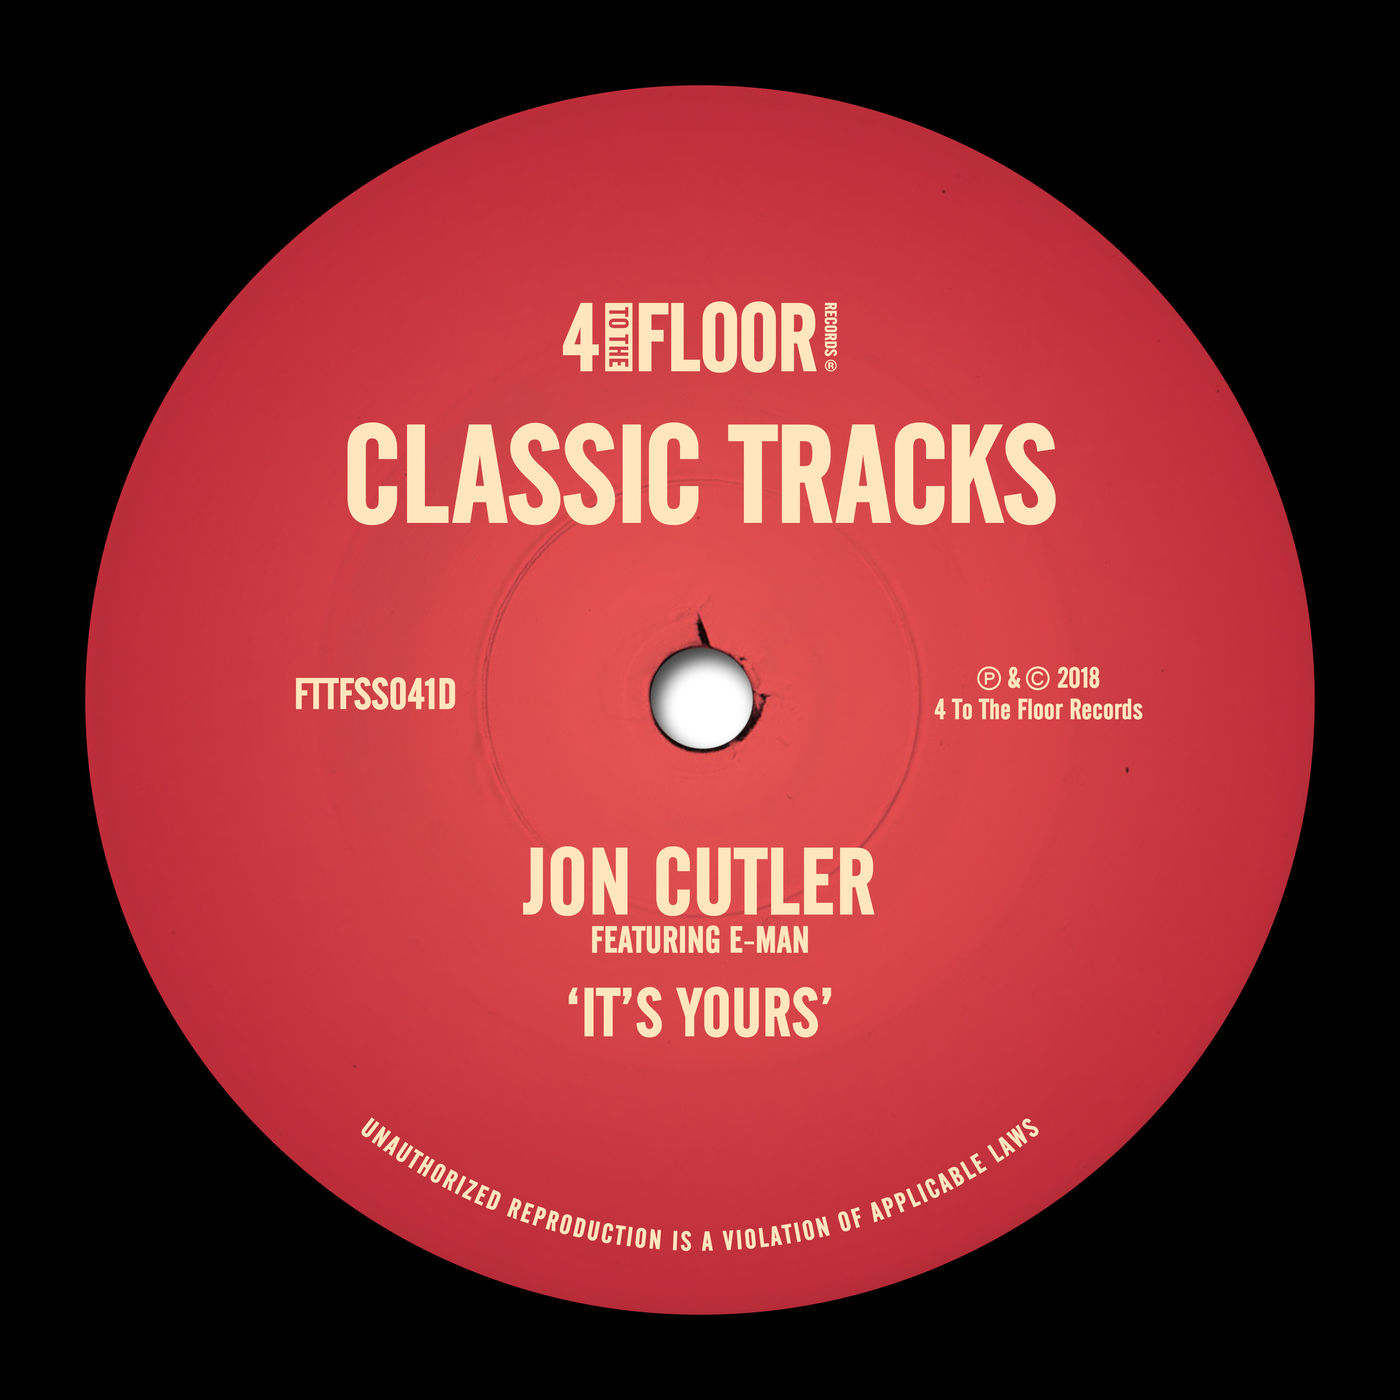 Jon Cutler - It's Yours (feat. E-Man) / 4 To The Floor Records